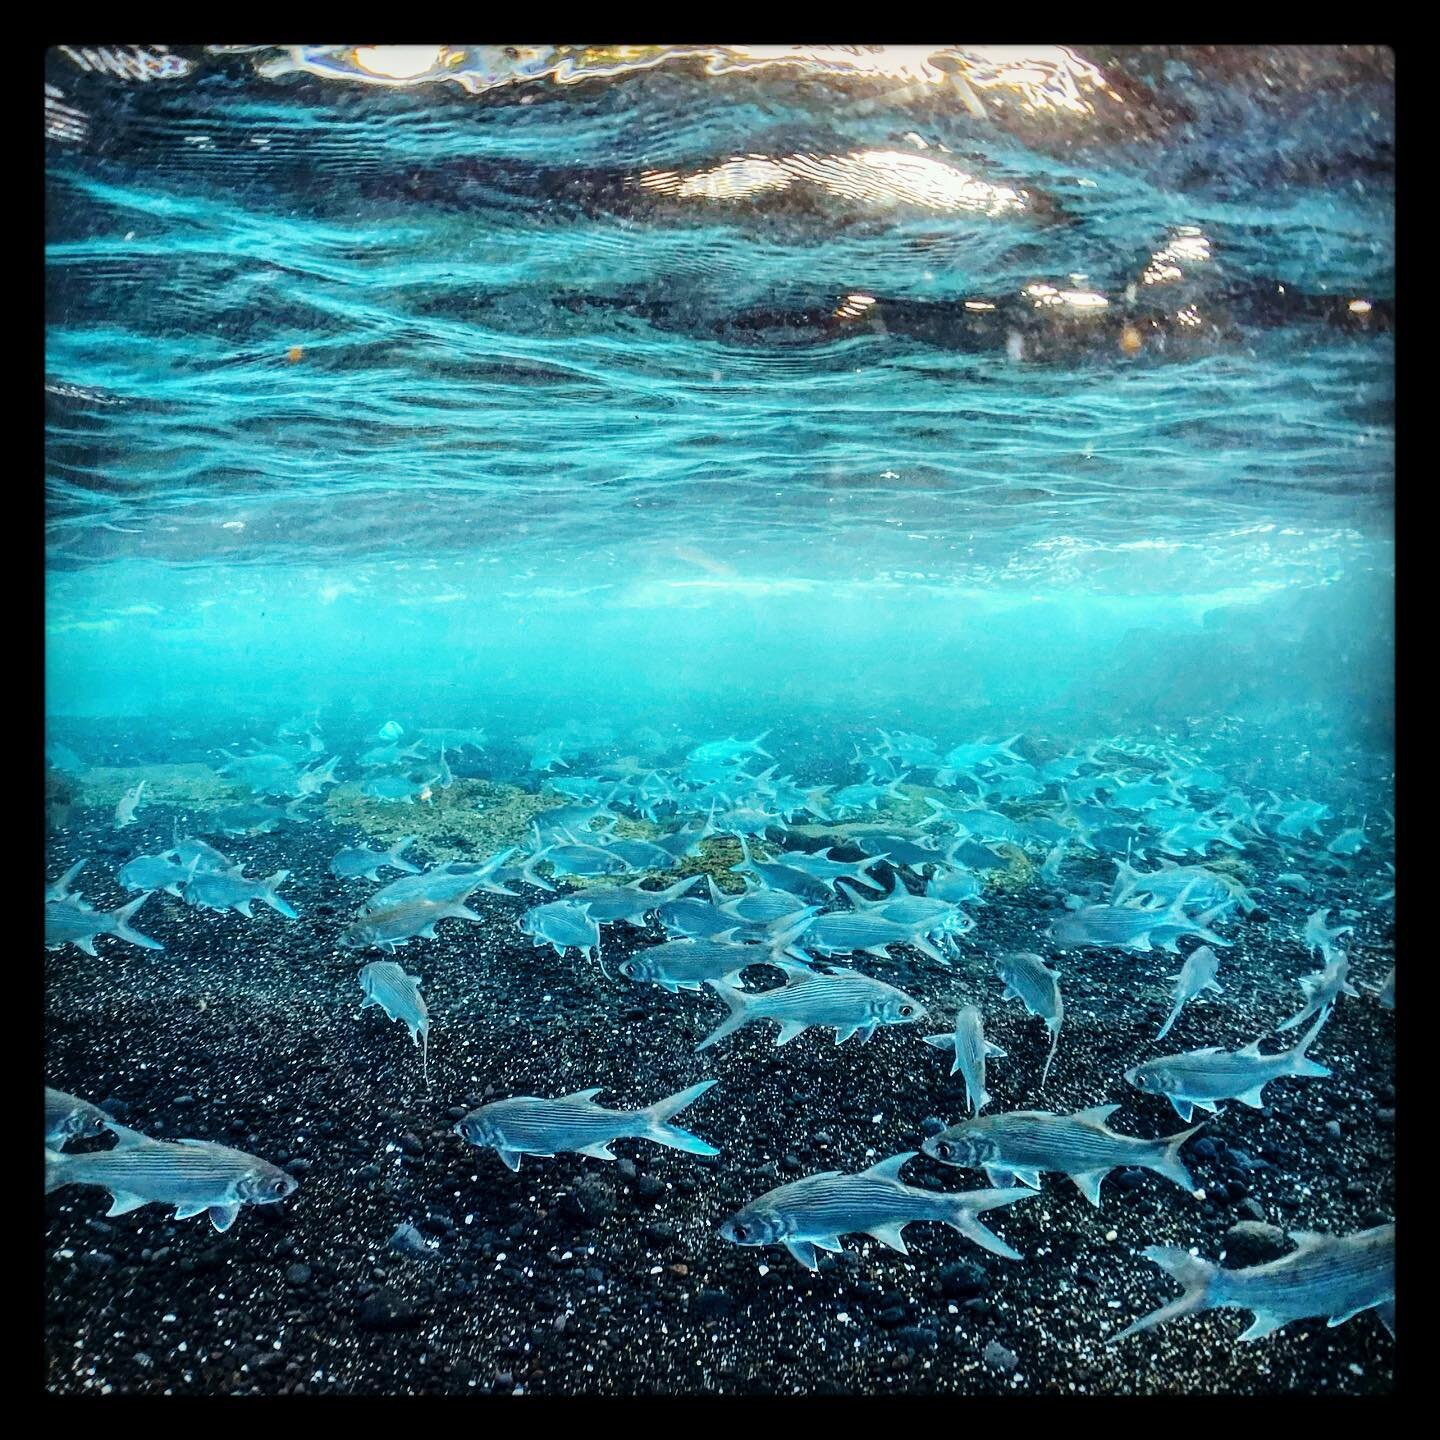 Protection preserves fish stocks ... here at #ahihibay a massive school of Moi frolic in the near shore areas of this marine protected area. Regarded as some of the tastiest fish, the moi, or Pacific threadfin, has been called the fish of kings becau